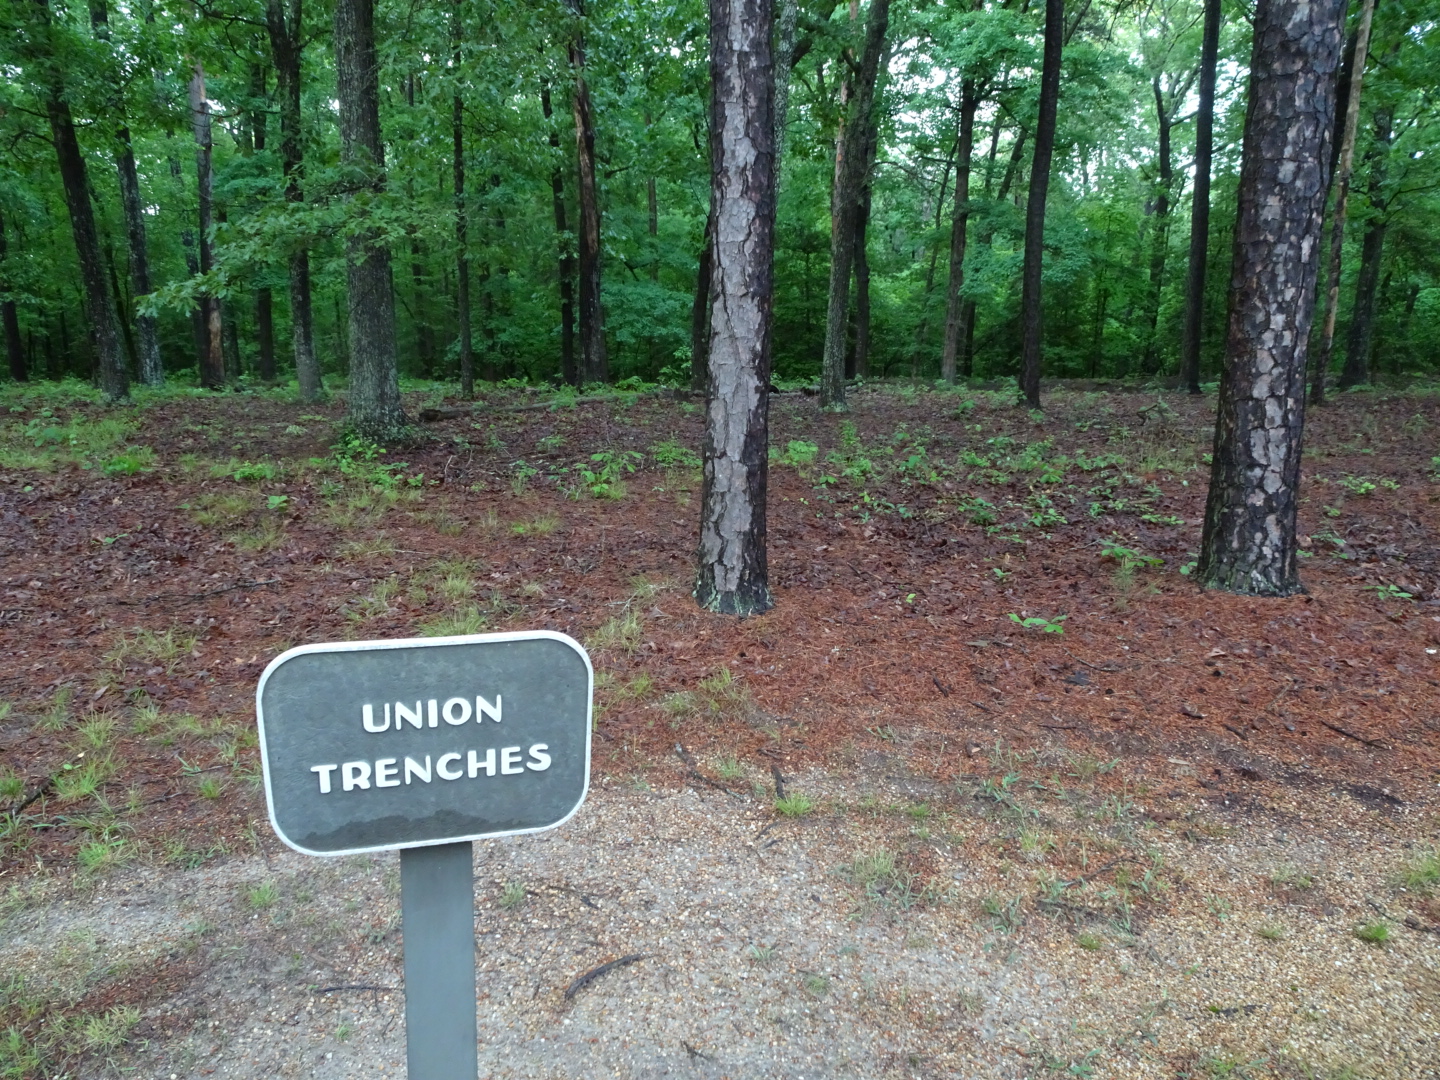 Remains of Union Trenches at Cold Harbor